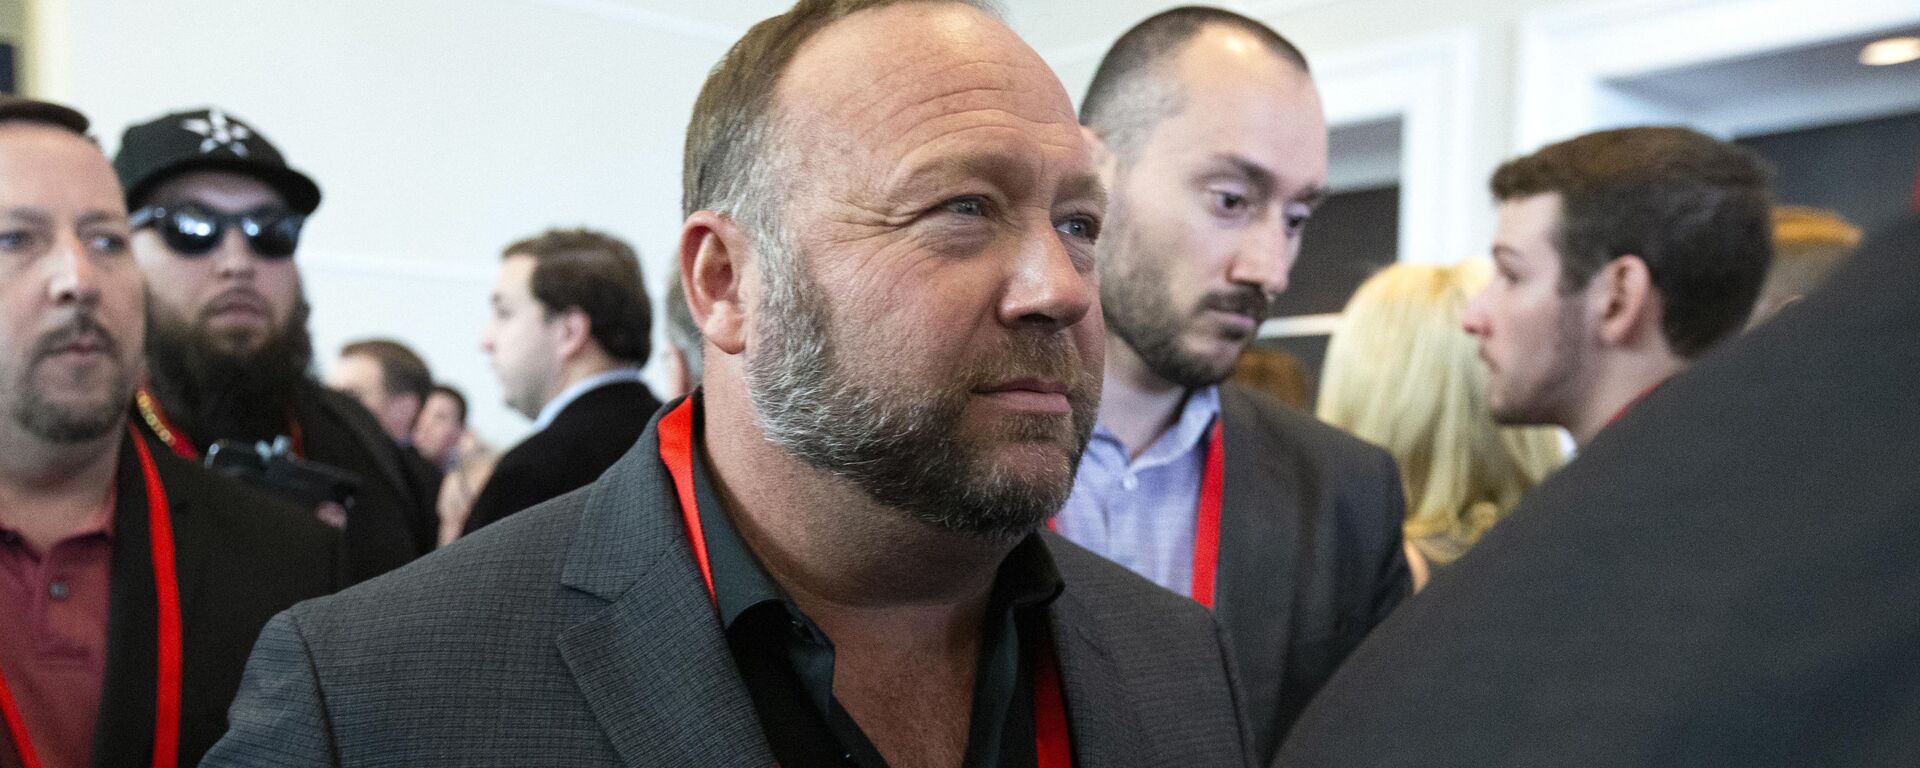 Conspiracy theorist Alex Jones walks at the Conservative Political Action Conference, CPAC 2020, at the National Harbor, in Oxon Hill, Md., Thursday, Feb. 27, 2020 - Sputnik International, 1920, 17.02.2023